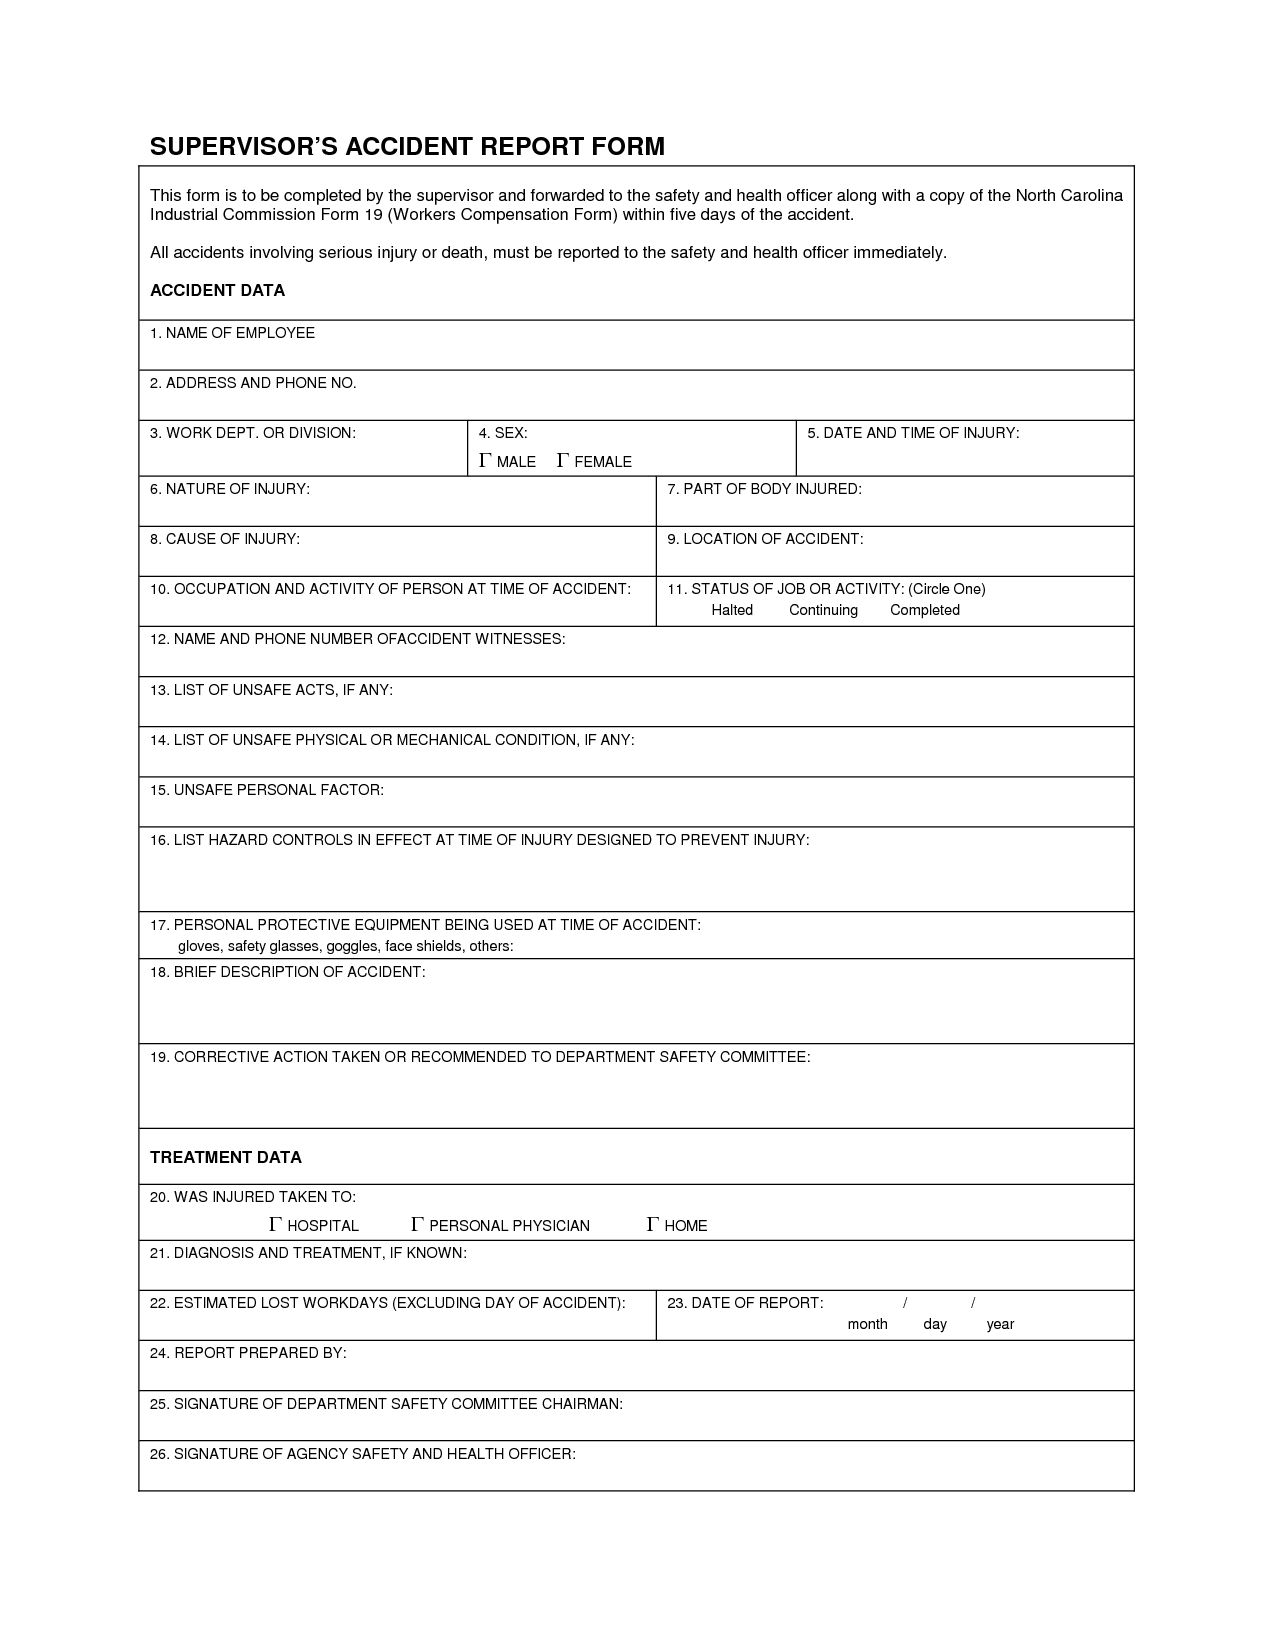 Industrial Accident Report Form Template | Supervisor's With Incident Hazard Report Form Template